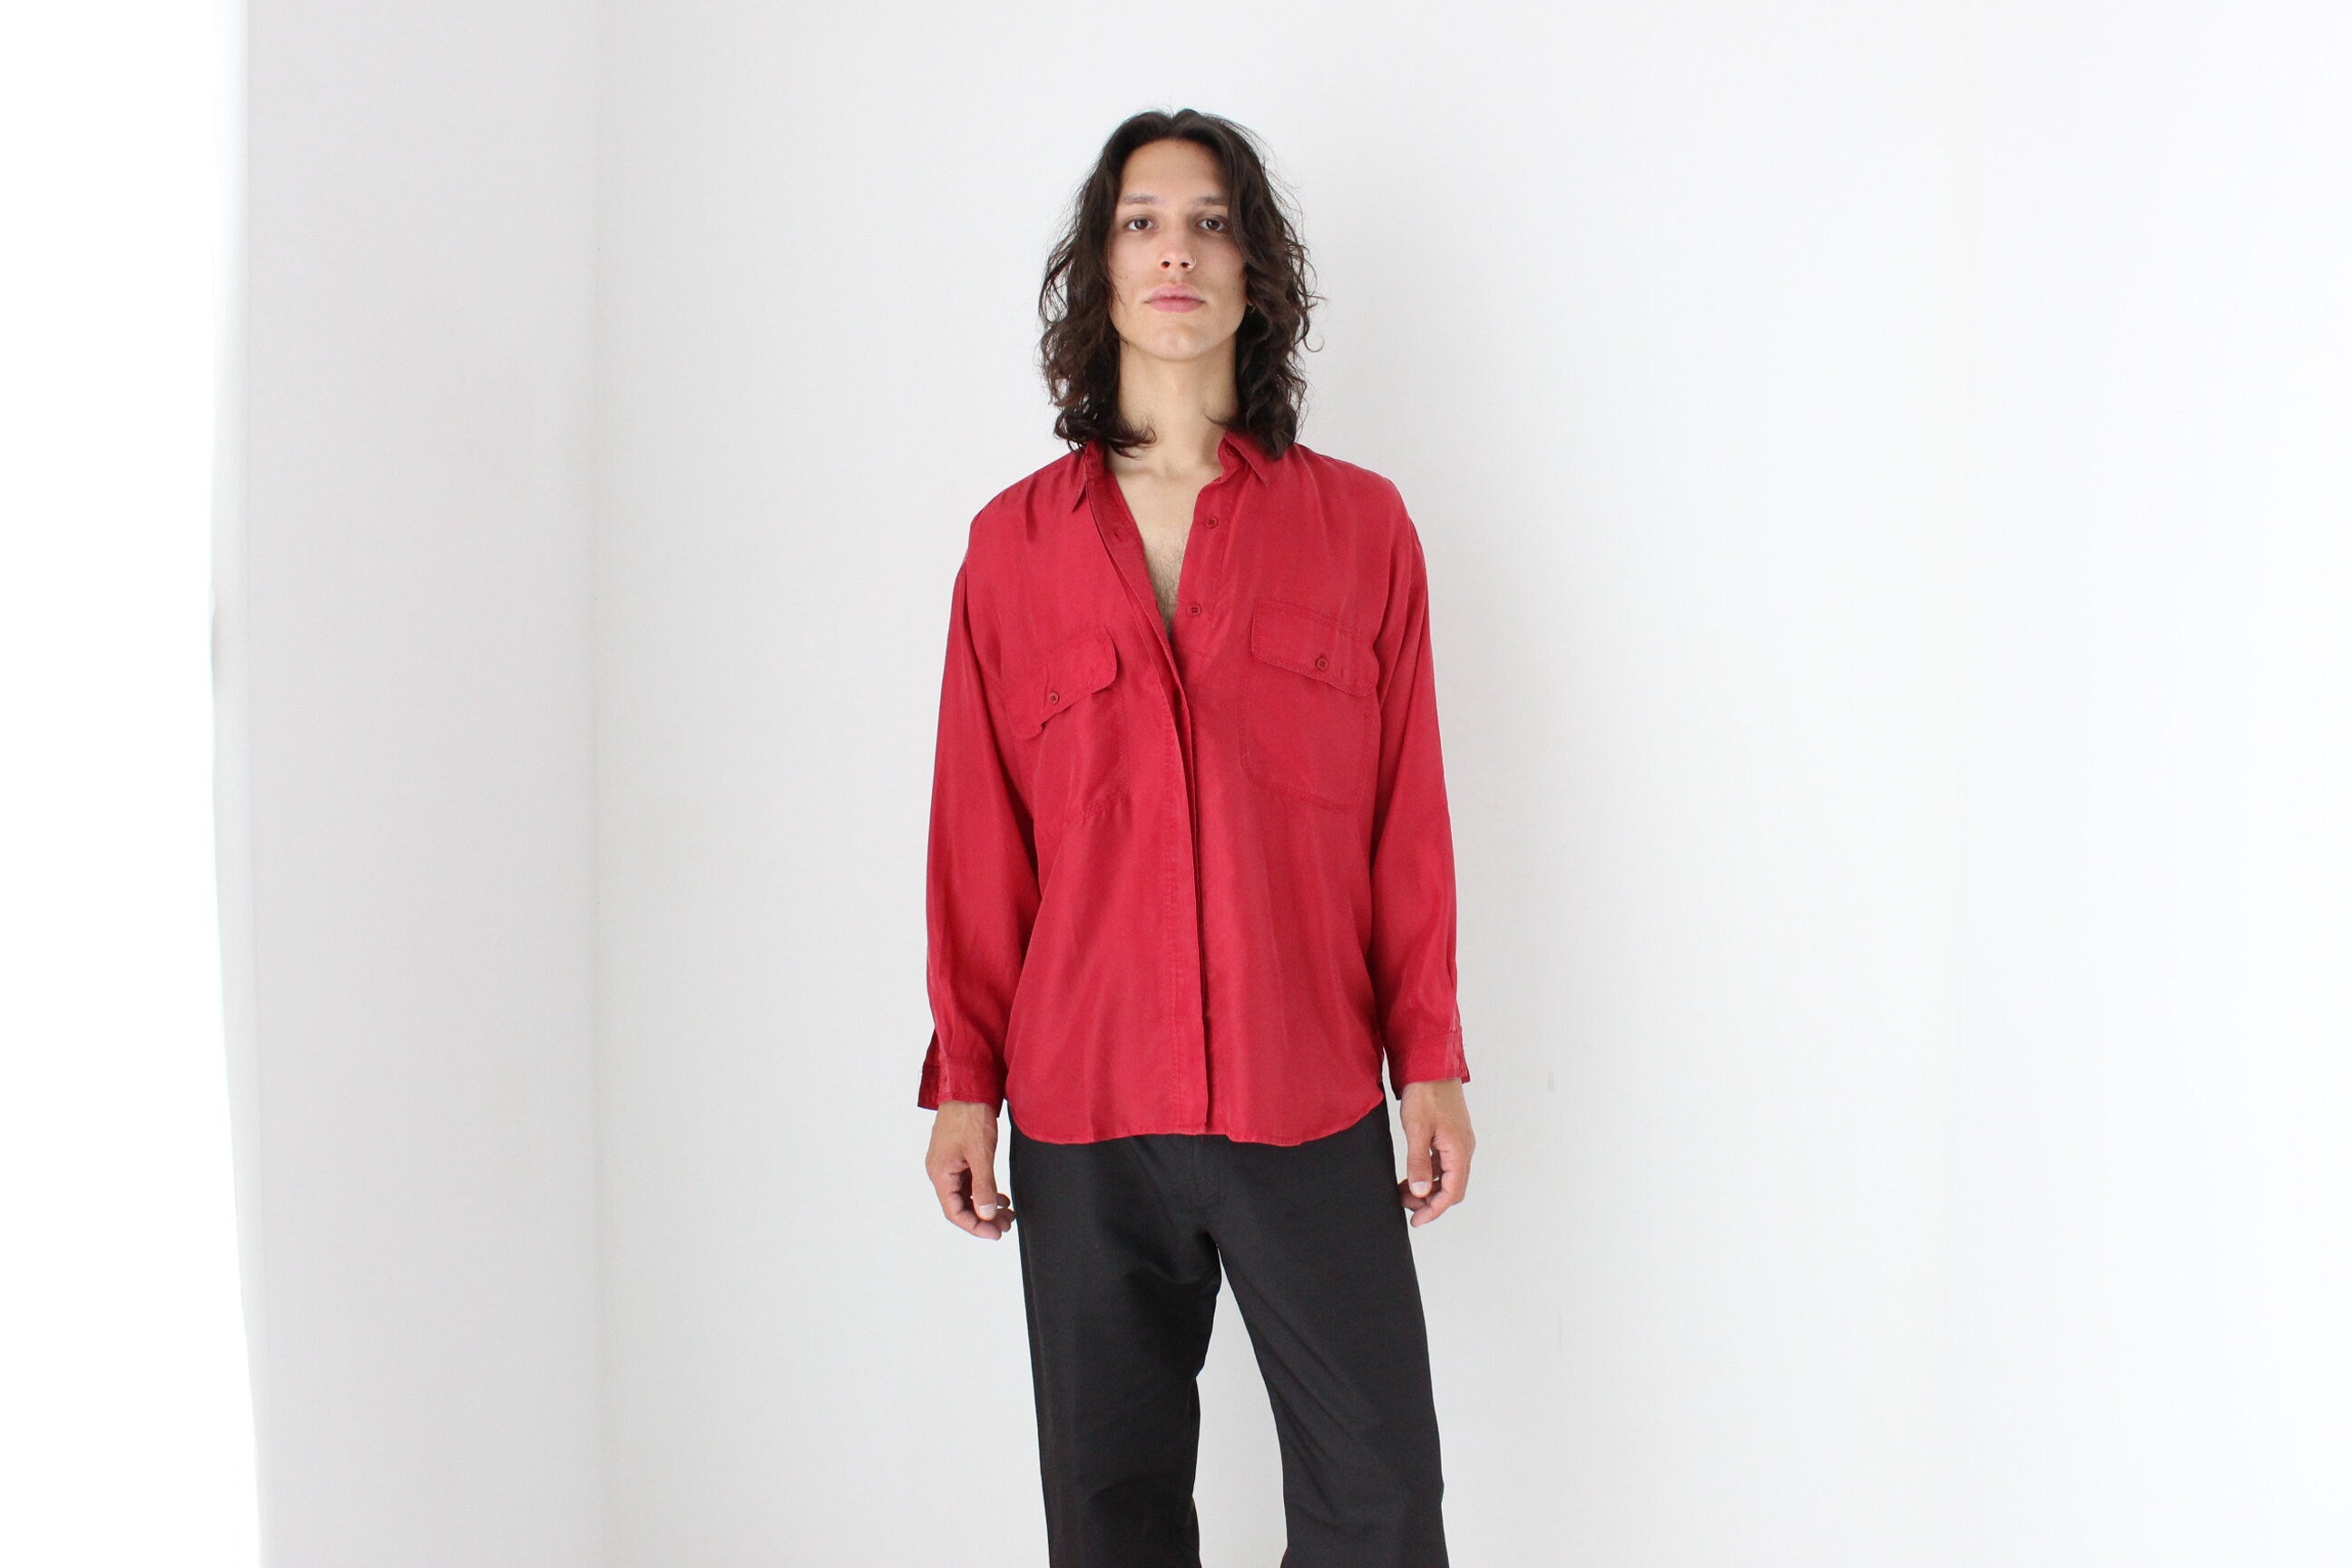 80s PURE SILK Double Pocket Long Sleeve Shirt in Red